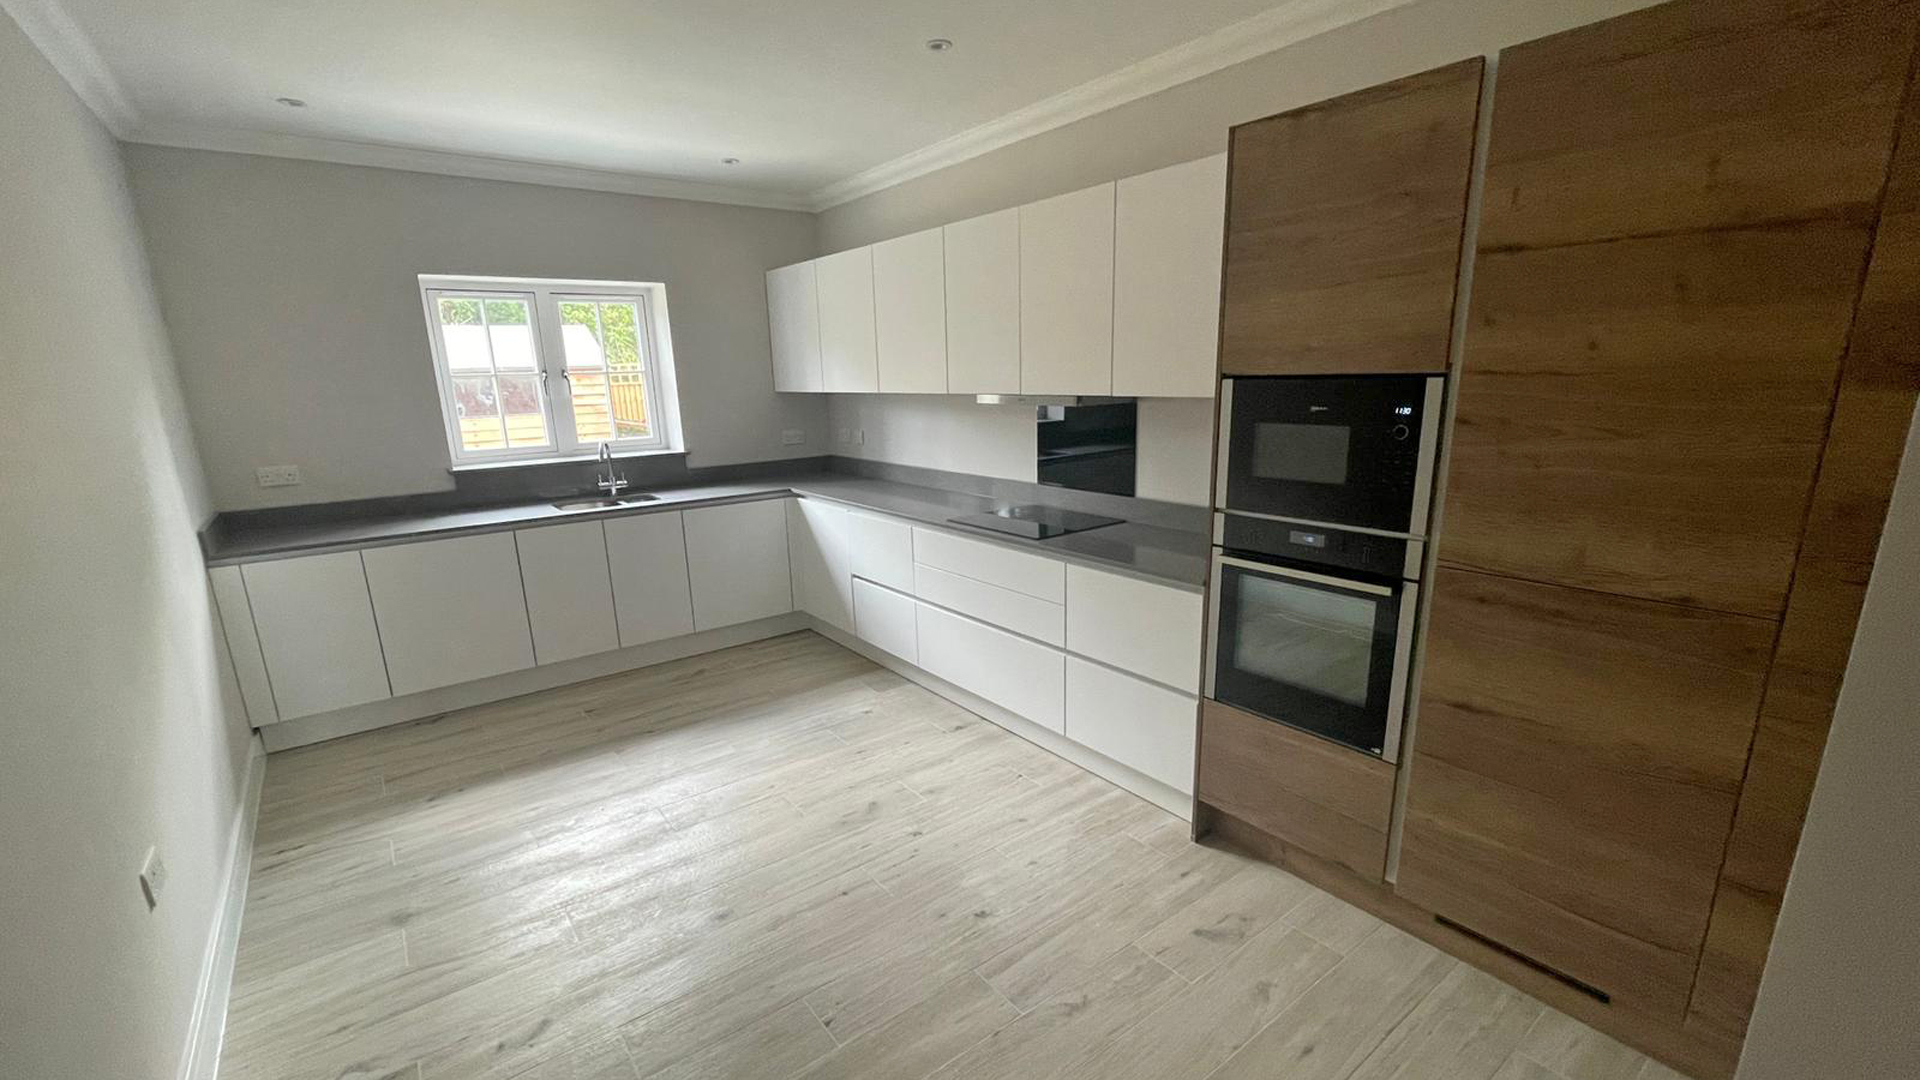 New build kitchen with grey worktops, white cabinets and dark wood tall housing